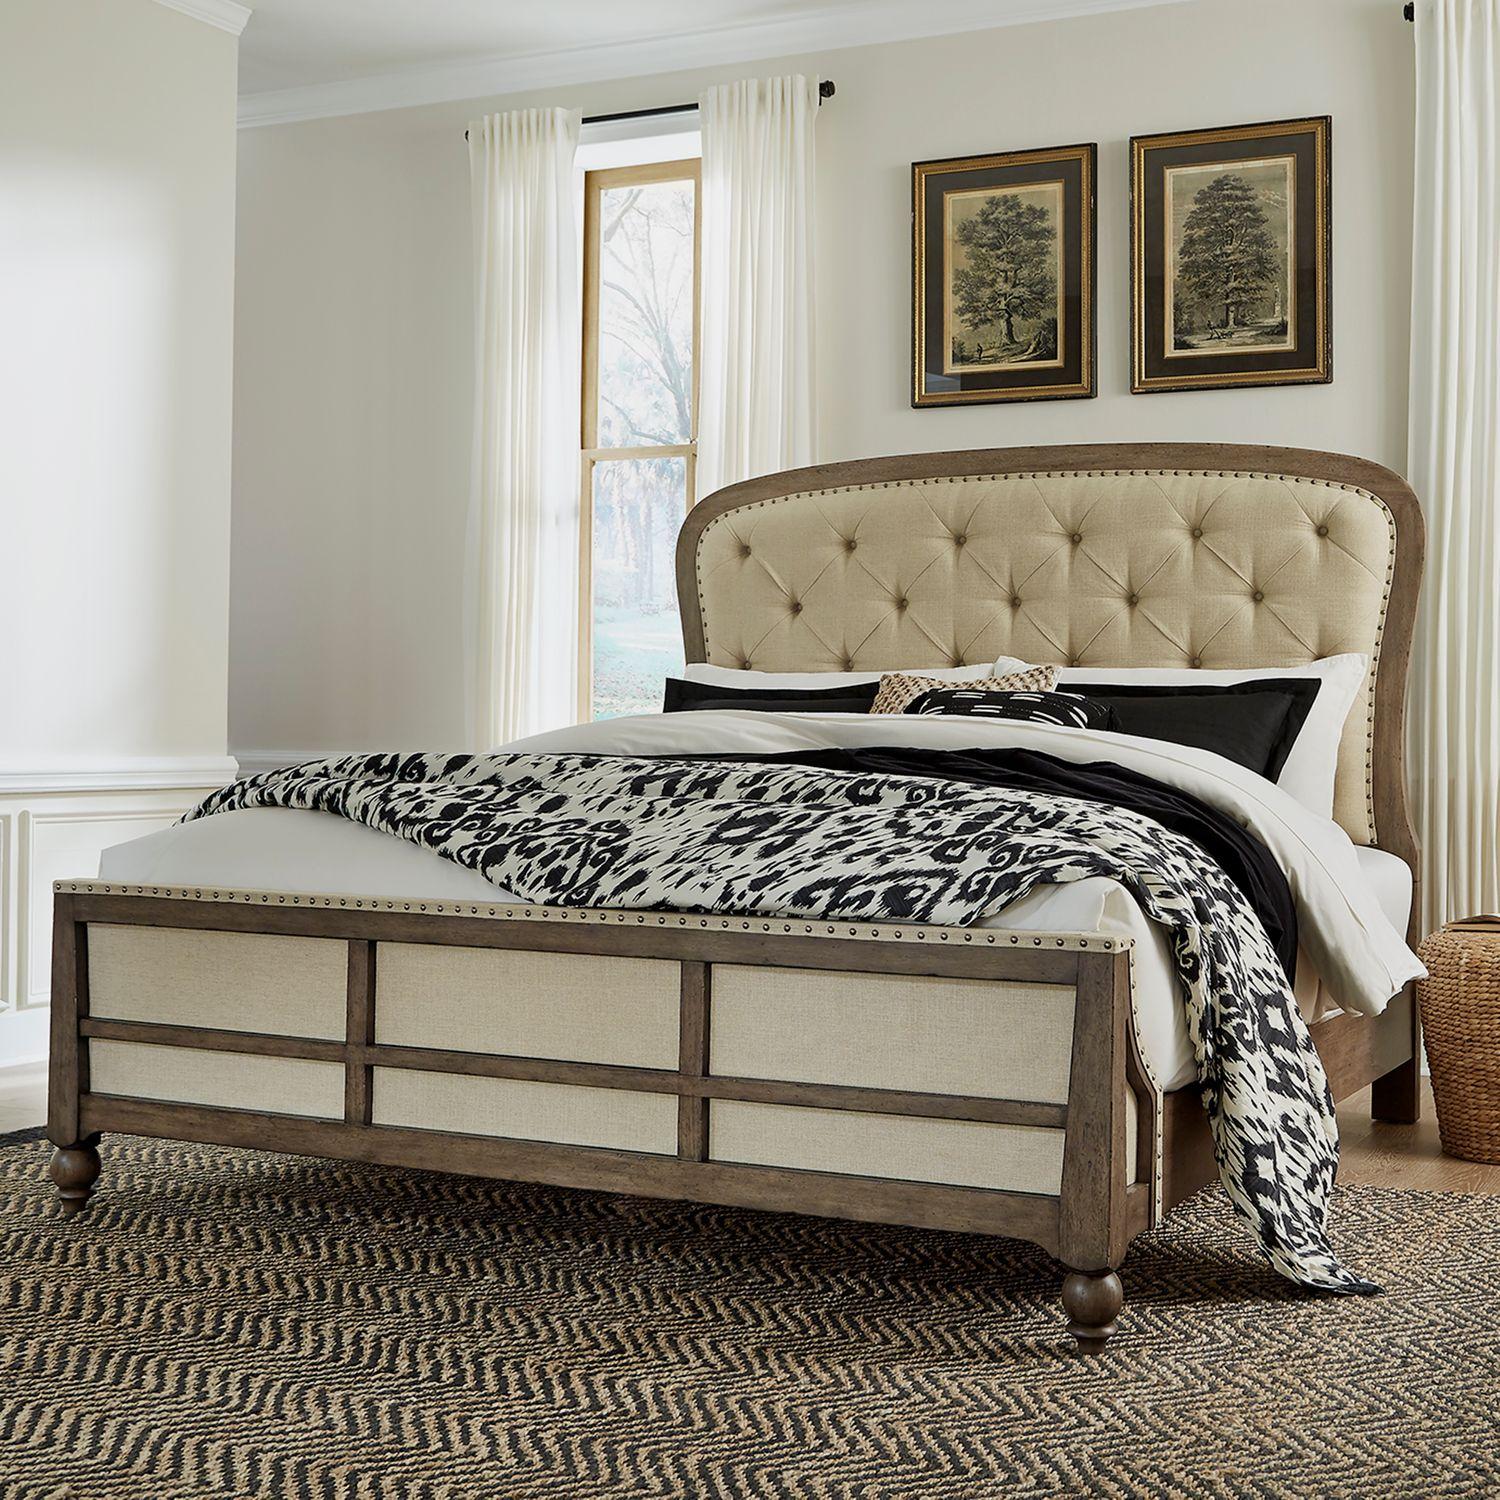 Transitional Upholstered Bed Americana Farmhouse (615-BR) 615-BR-KSH in Taupe, Black Linen